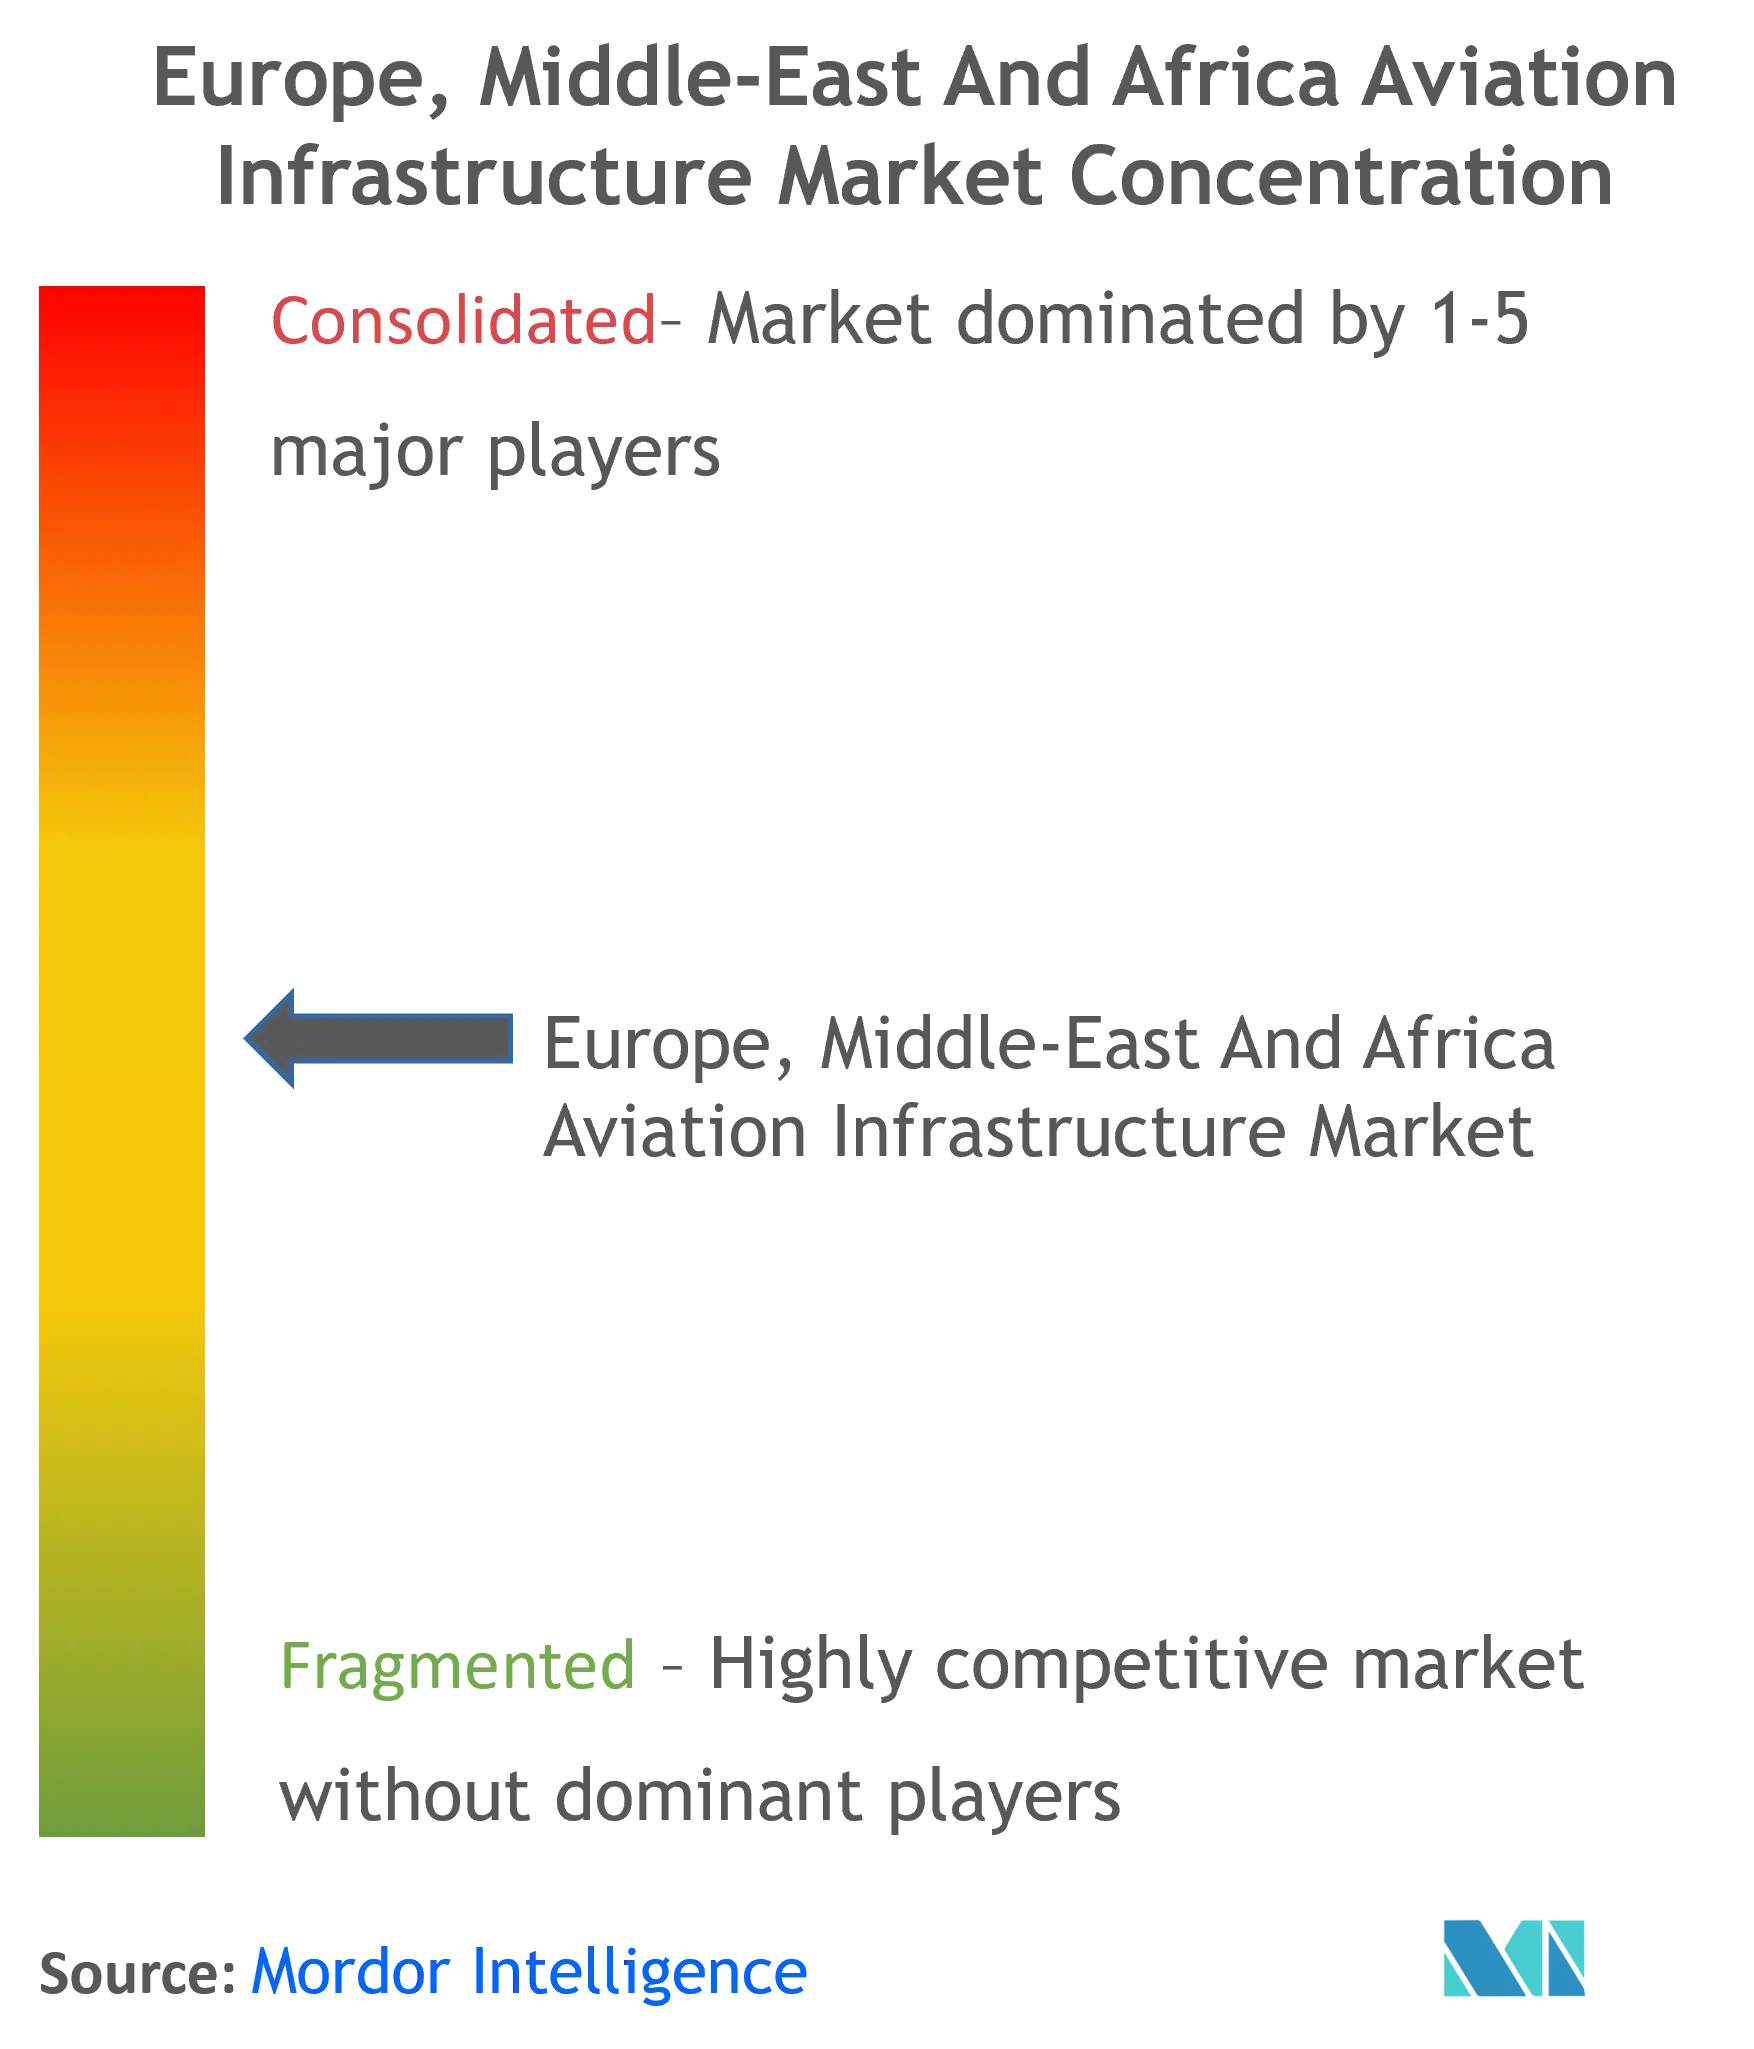 Europe, Middle-East And Africa Aviation Infrastructure Market Concentration